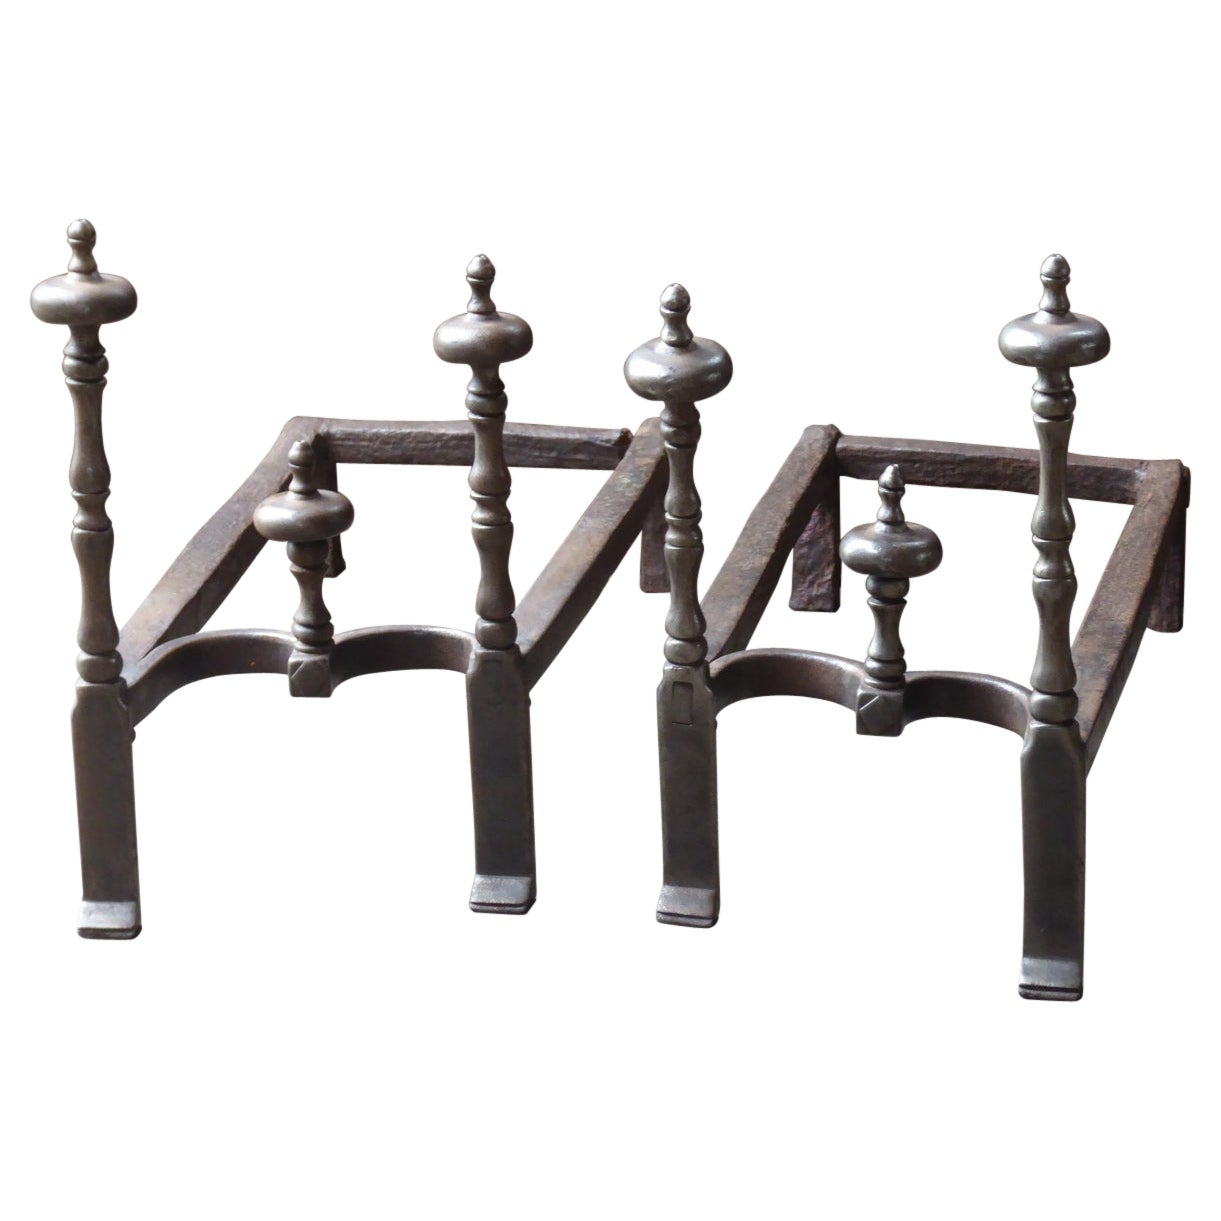 18th-19th Century French Neoclassical Period Andirons or Firedogs For Sale